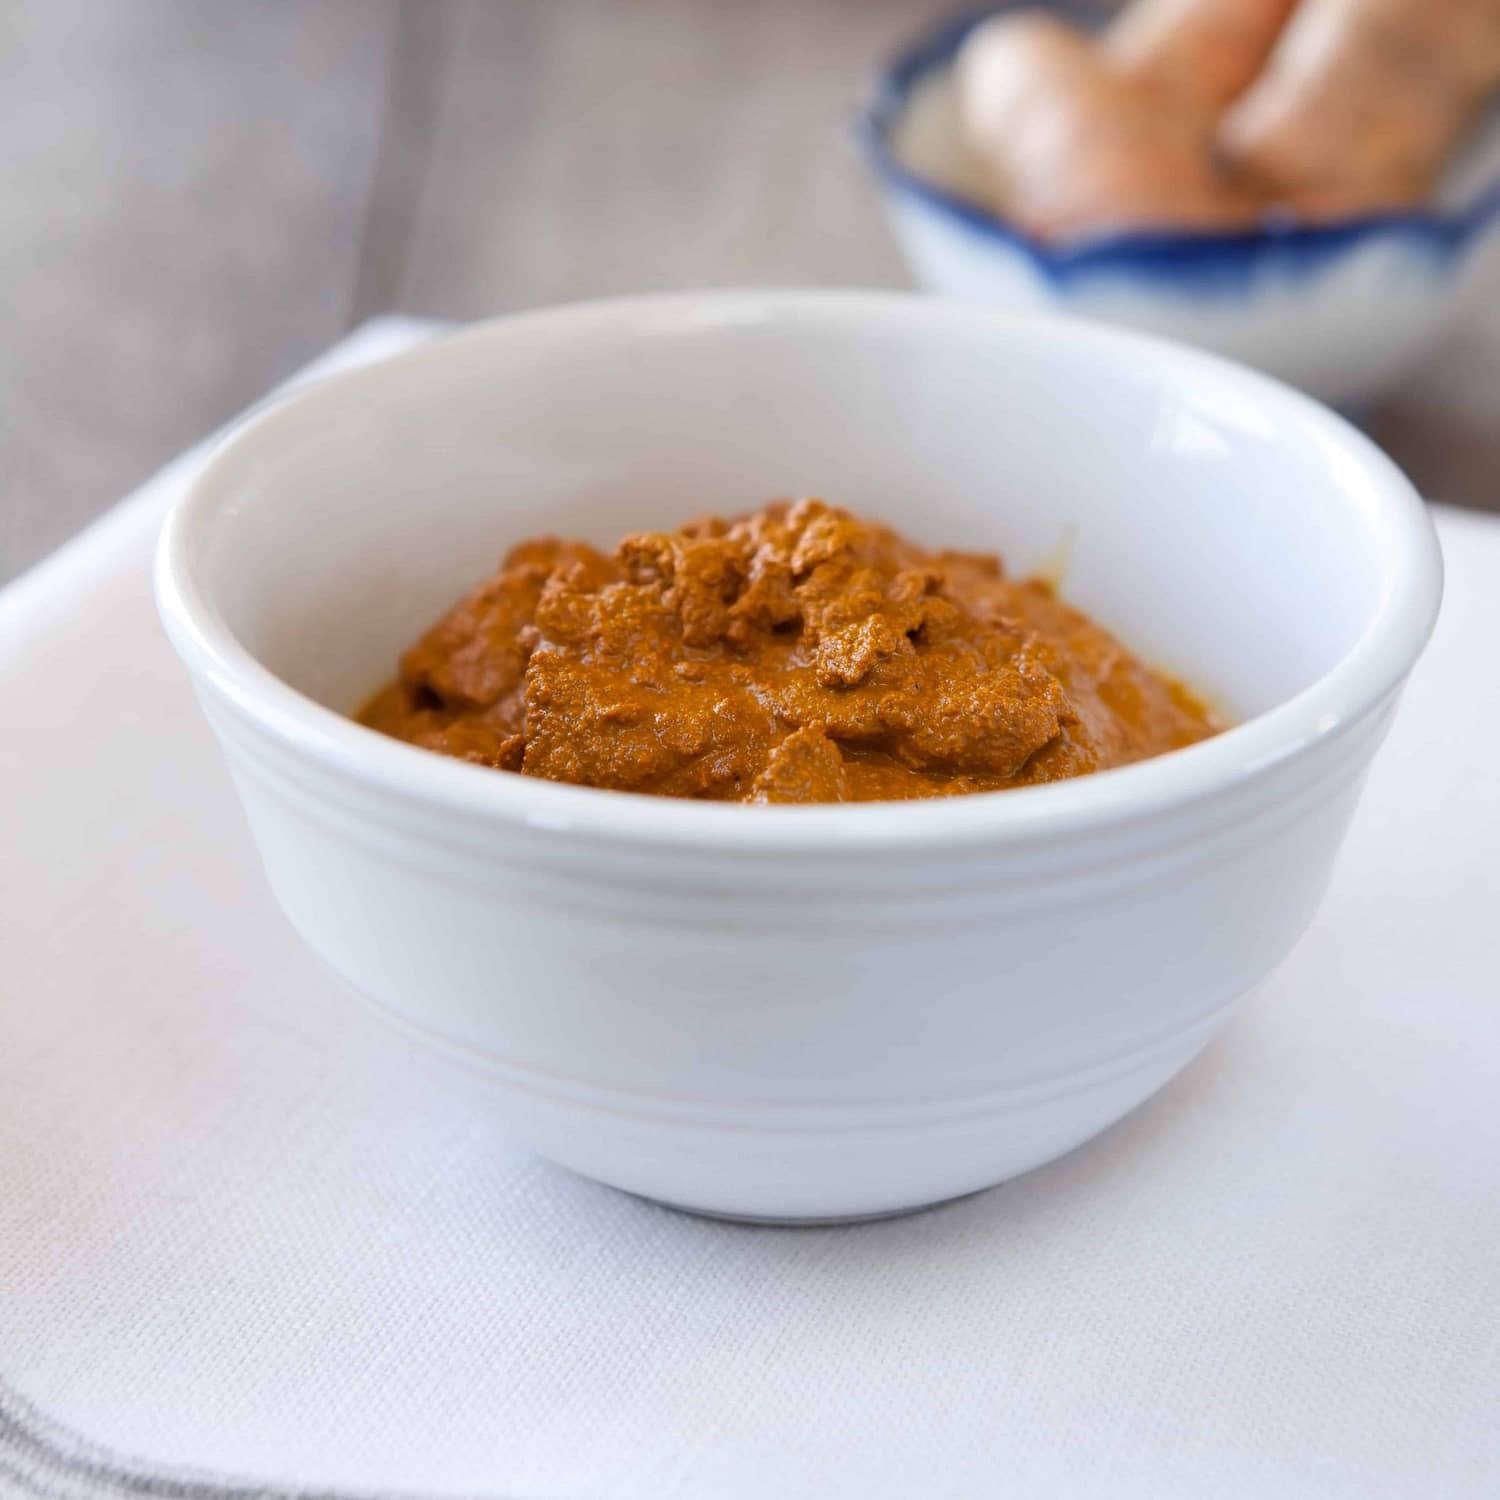 Turmeric paste in a bowl